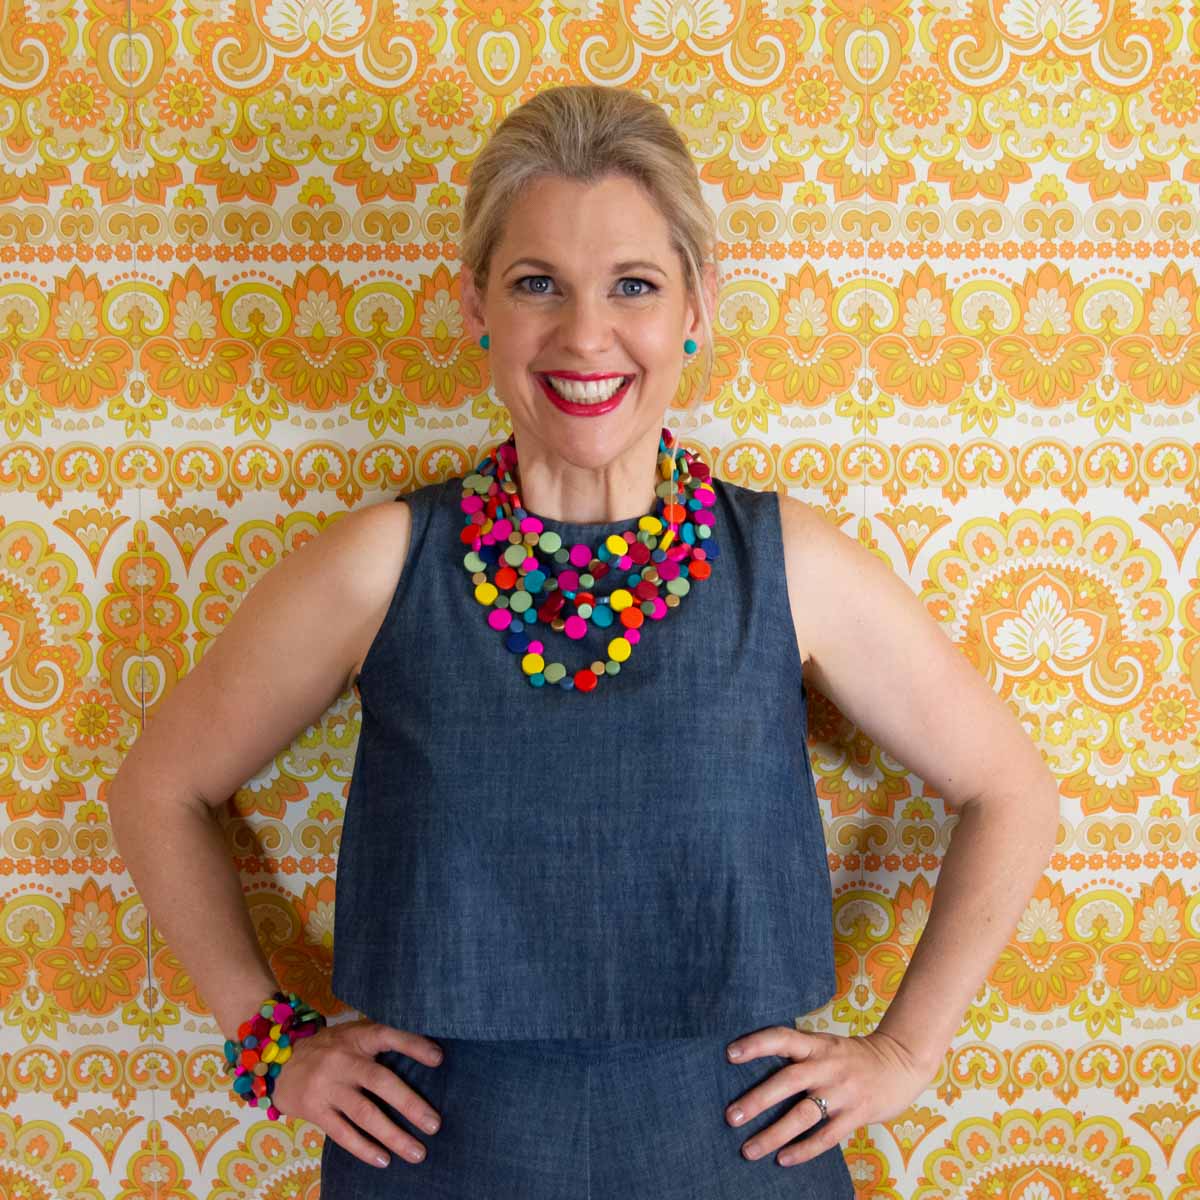 Smiling woman wearing stacked multi coloured necklace and bracelet in front of yellow and orange vintage wallpaper.